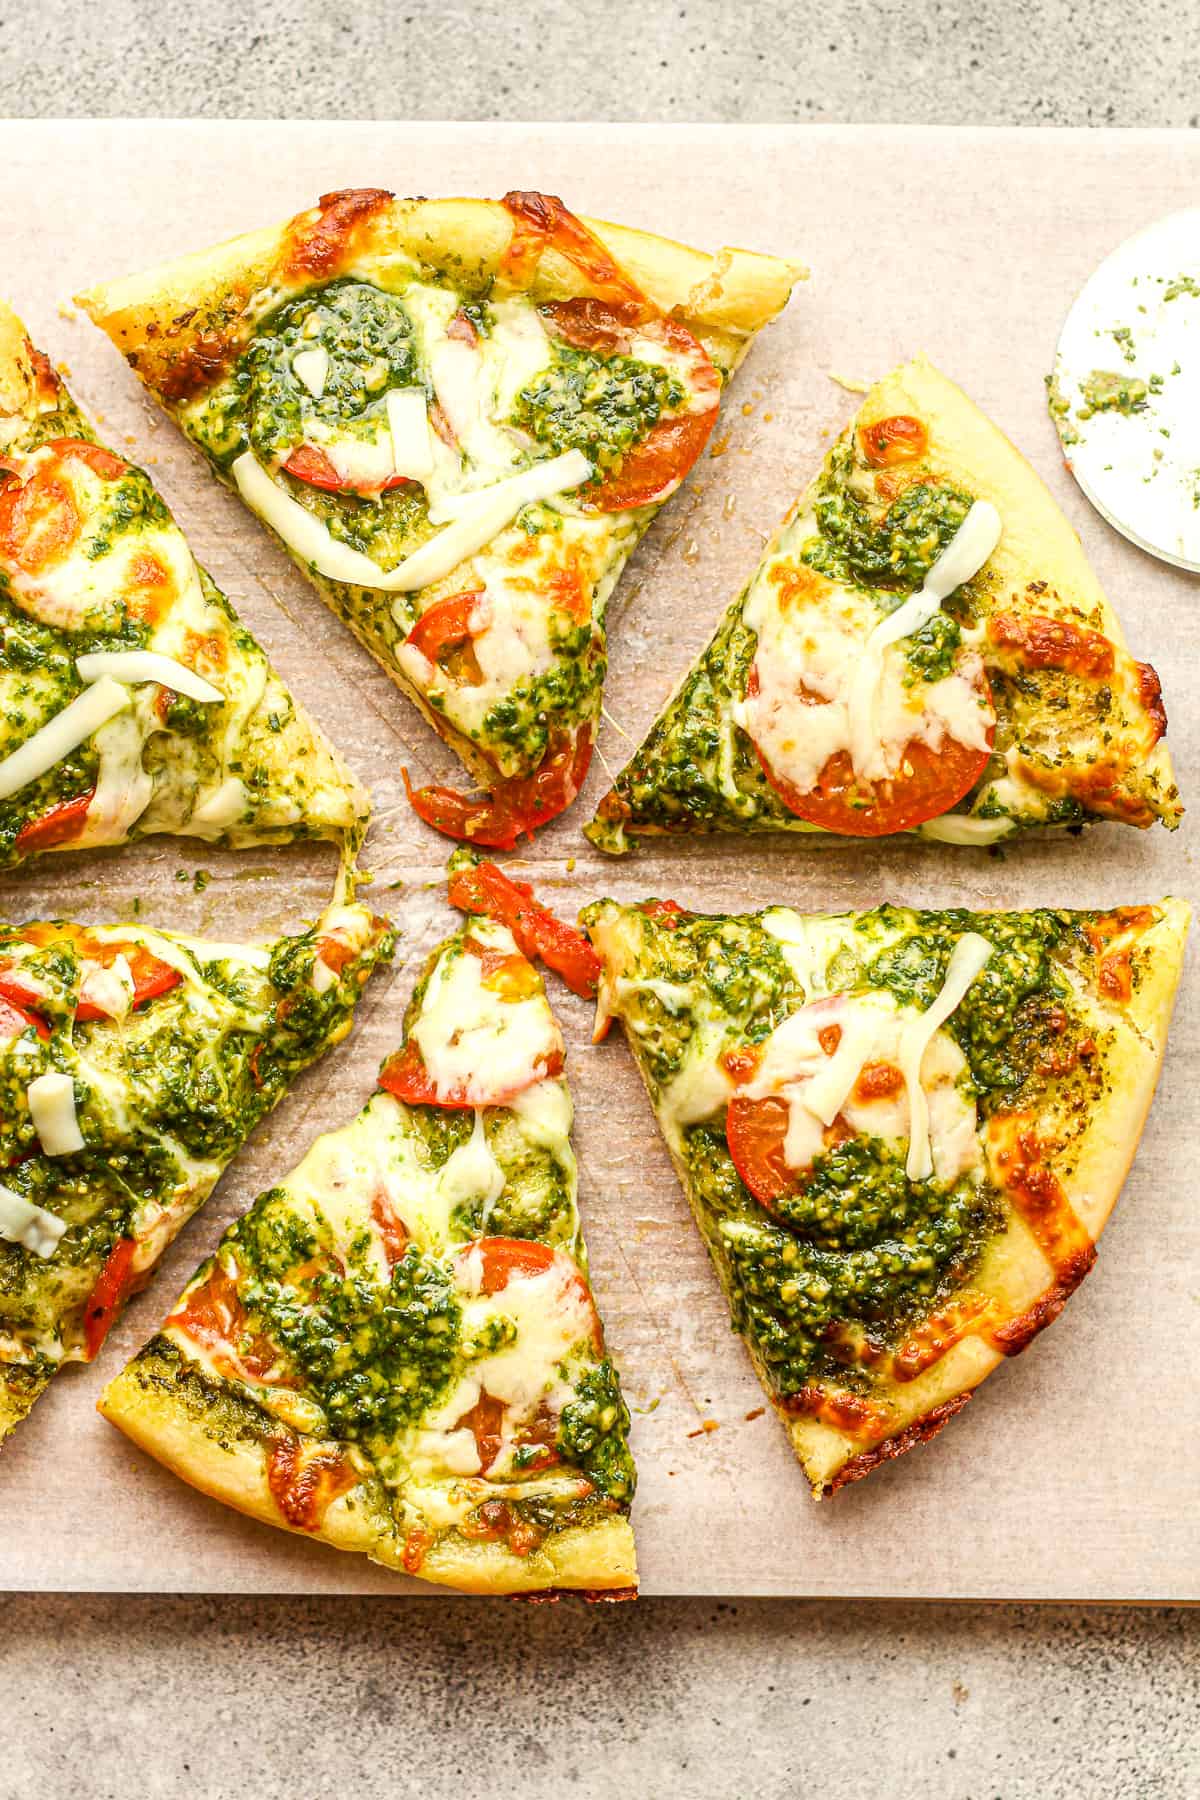 Six slices of pesto pizza with tomatoes and fresh mozzarella cheese.